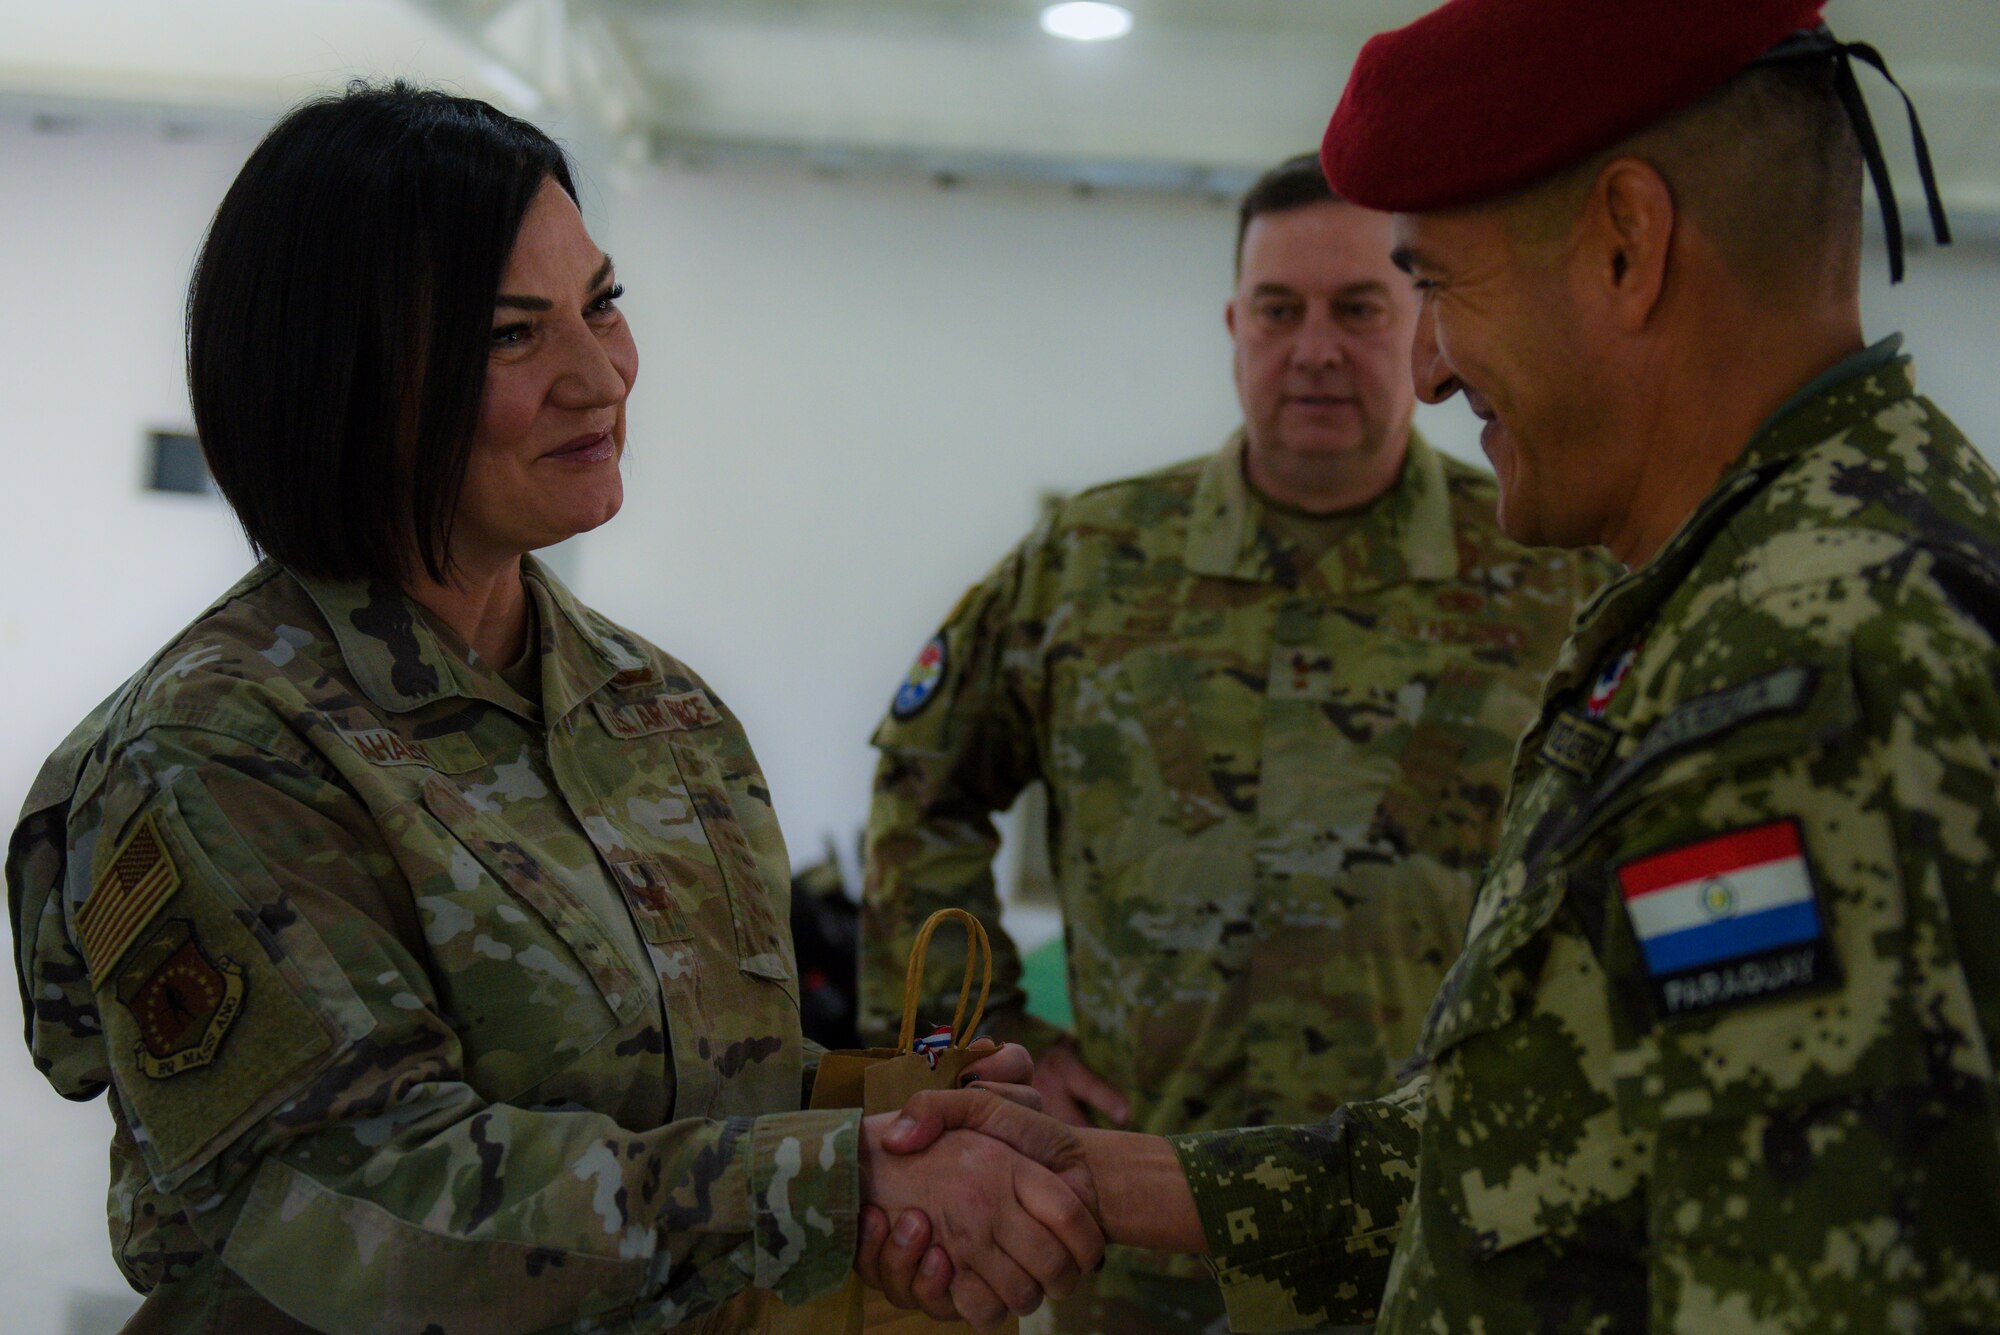 U.S. Air Force Col. Lisa Ahaesy, the director of staff of the Massachusetts Air National Guard, shakes hands with a member of the Paraguayan army at a State Partnership Program event in Asunción, Paraguay, May 18, 2023. Ahaesy supported the delivery of more than 1,000 sets of personal protective firefighting equipment donated by Massachusetts fire departments, facilitated by the Massachusetts National Guard and the Military Division of the Commonwealth of Massachusetts.